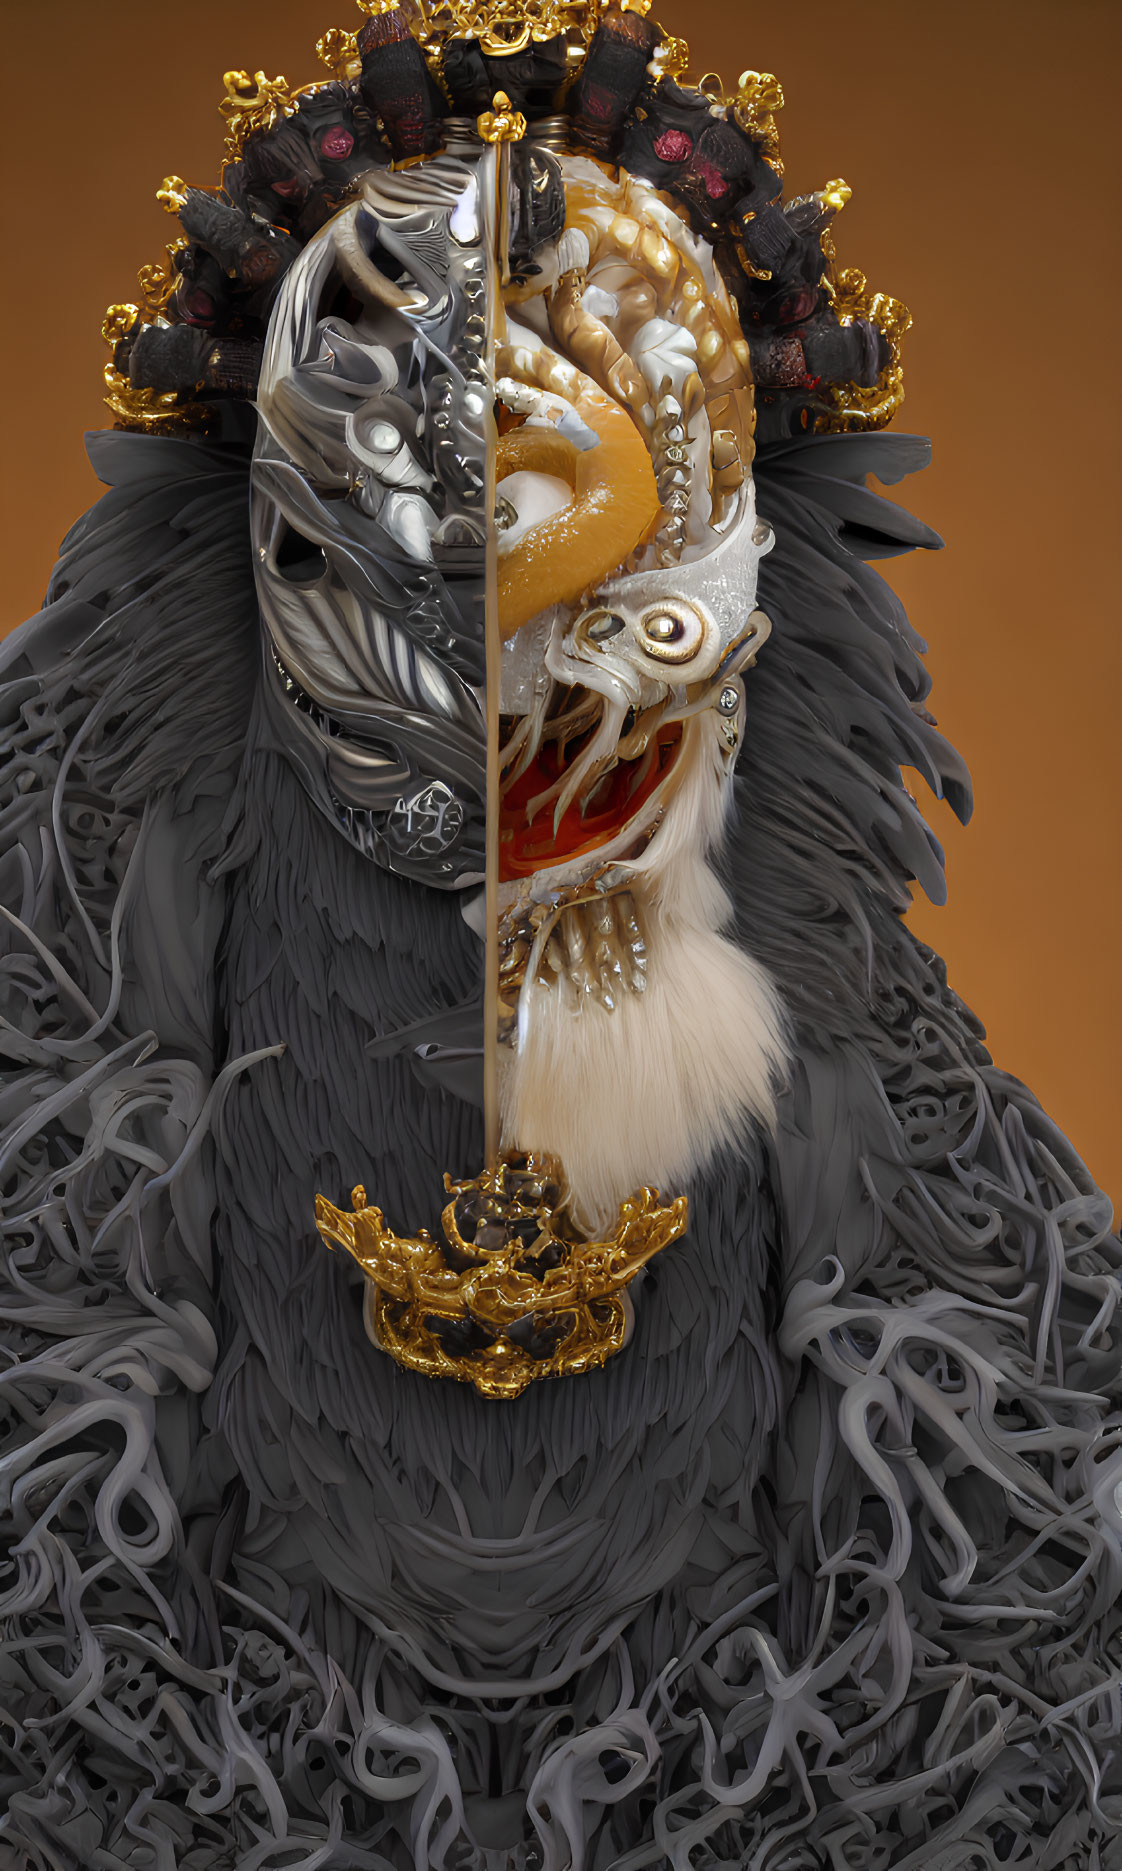 Surreal portrait featuring samurai helmet and ornate creature with silver mask